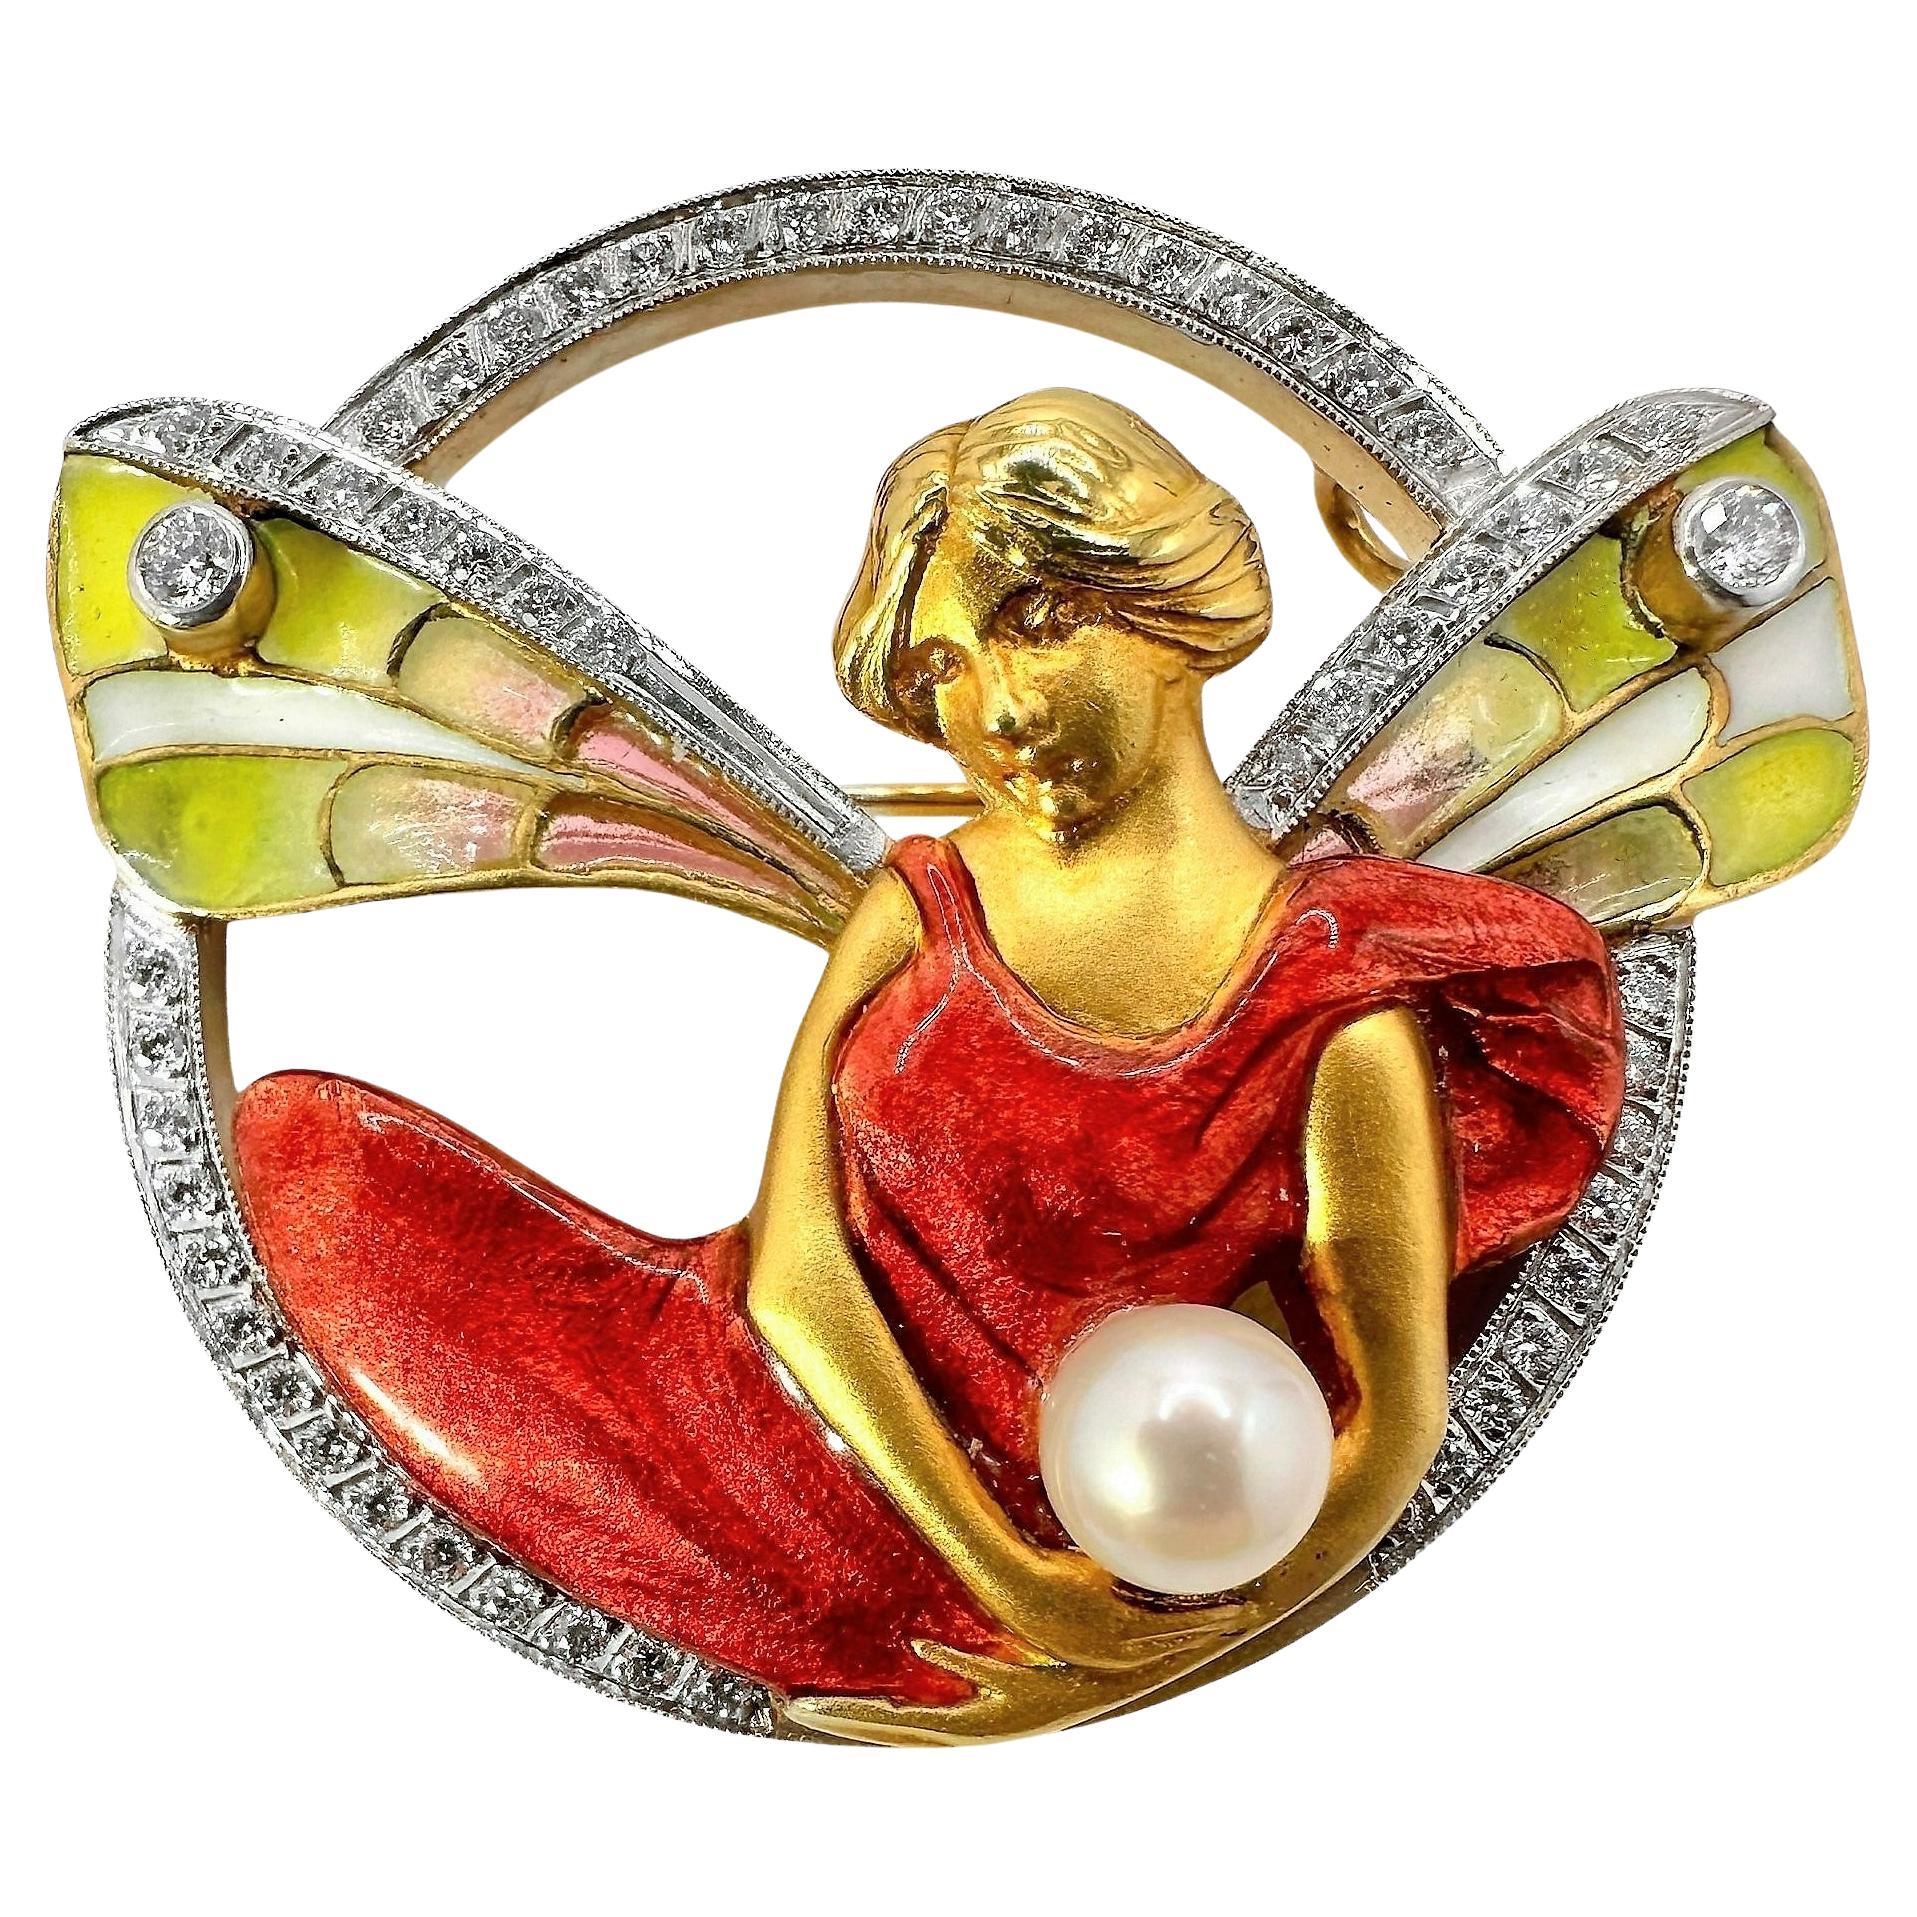 Exquisite Masriera Mythological Nymph Brooch in Gold, Diamonds, Pearl and Enamel